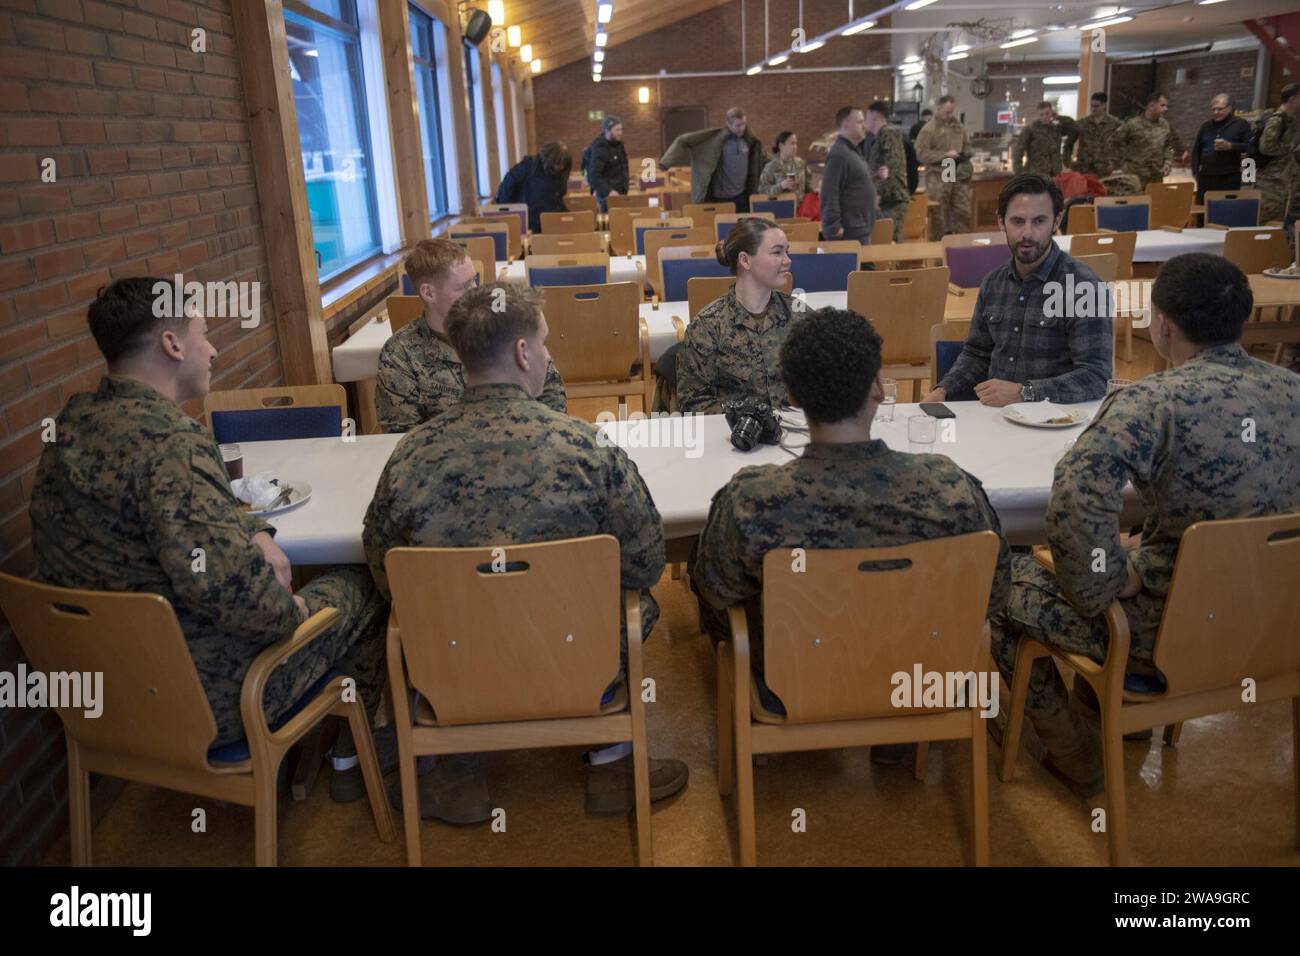 US military forces. Marine Corps Gen. Joe Dunford, chairman of the Joint Chiefs of Staff, meets with deployed service members in Vaernes, Norway Dec. 21, 2018. Dunford, along with USO entertainers, visited service members who are away from home during the holidays at various locations. This year’s entertainers include actors Milo Ventimiglia, Wilmer Valderrama, DJ J Dayz, Fittest Man on Earth Matt Fraser, 3-time Olympic Golf Medalist Shaun White, Country Music Singer Kellie Pickler, and comedian Jessiemae Peluso. (DoD photo by Navy Petty Officer 1st Class Dominique A. Pineiro) Stock Photo